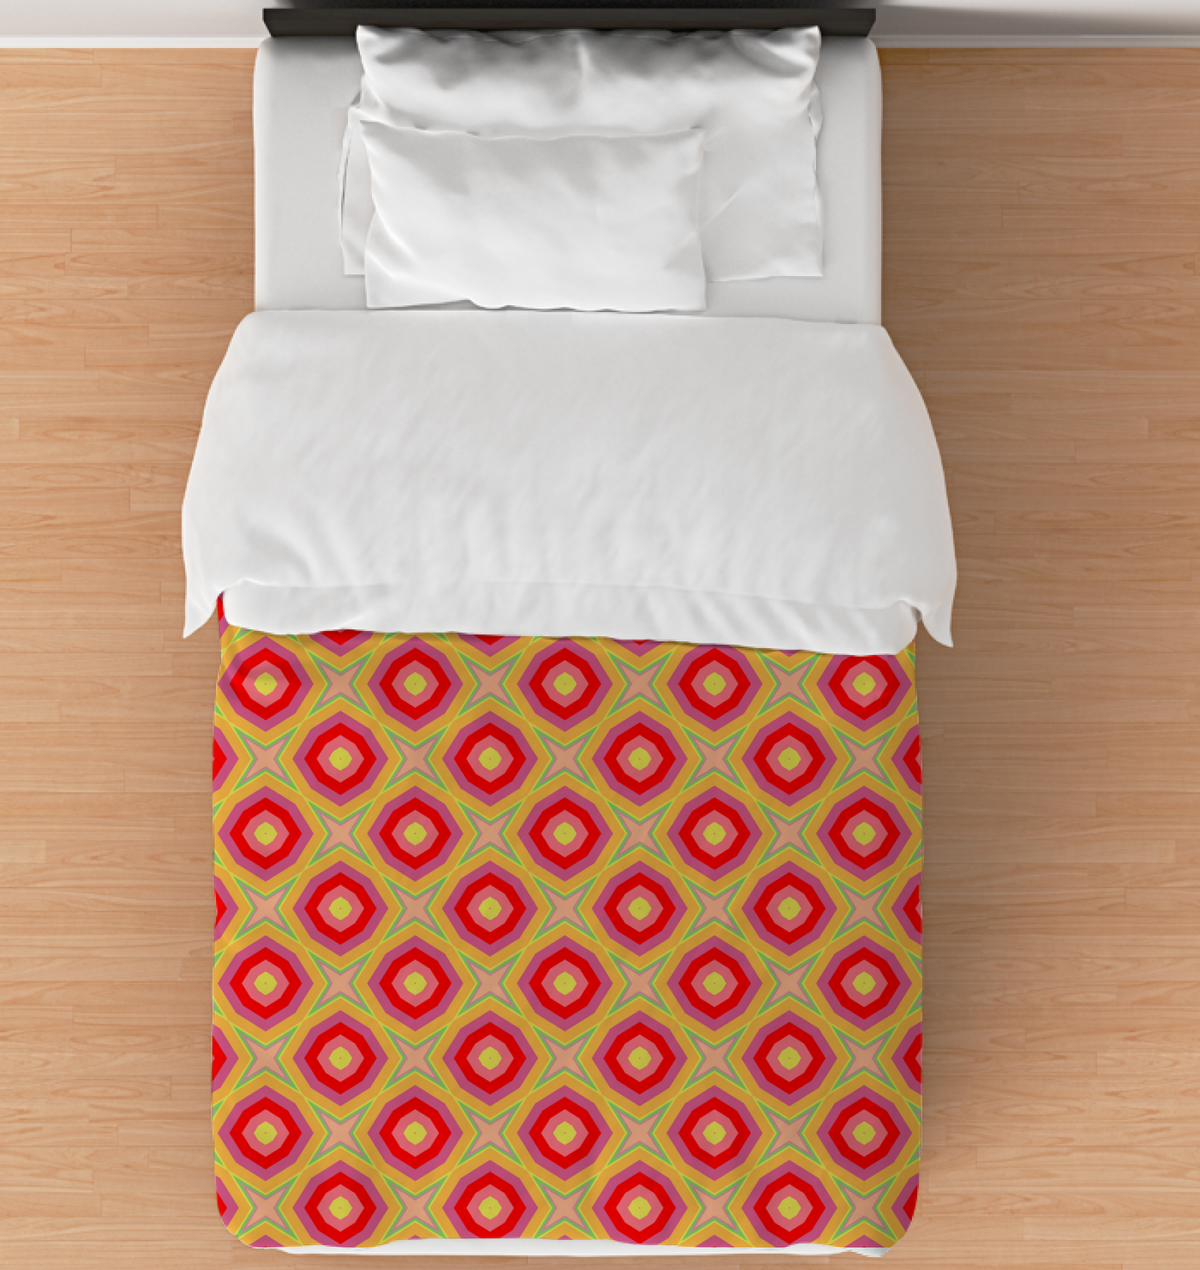 Modern Mosaic Duvet Cover on a neatly made bed